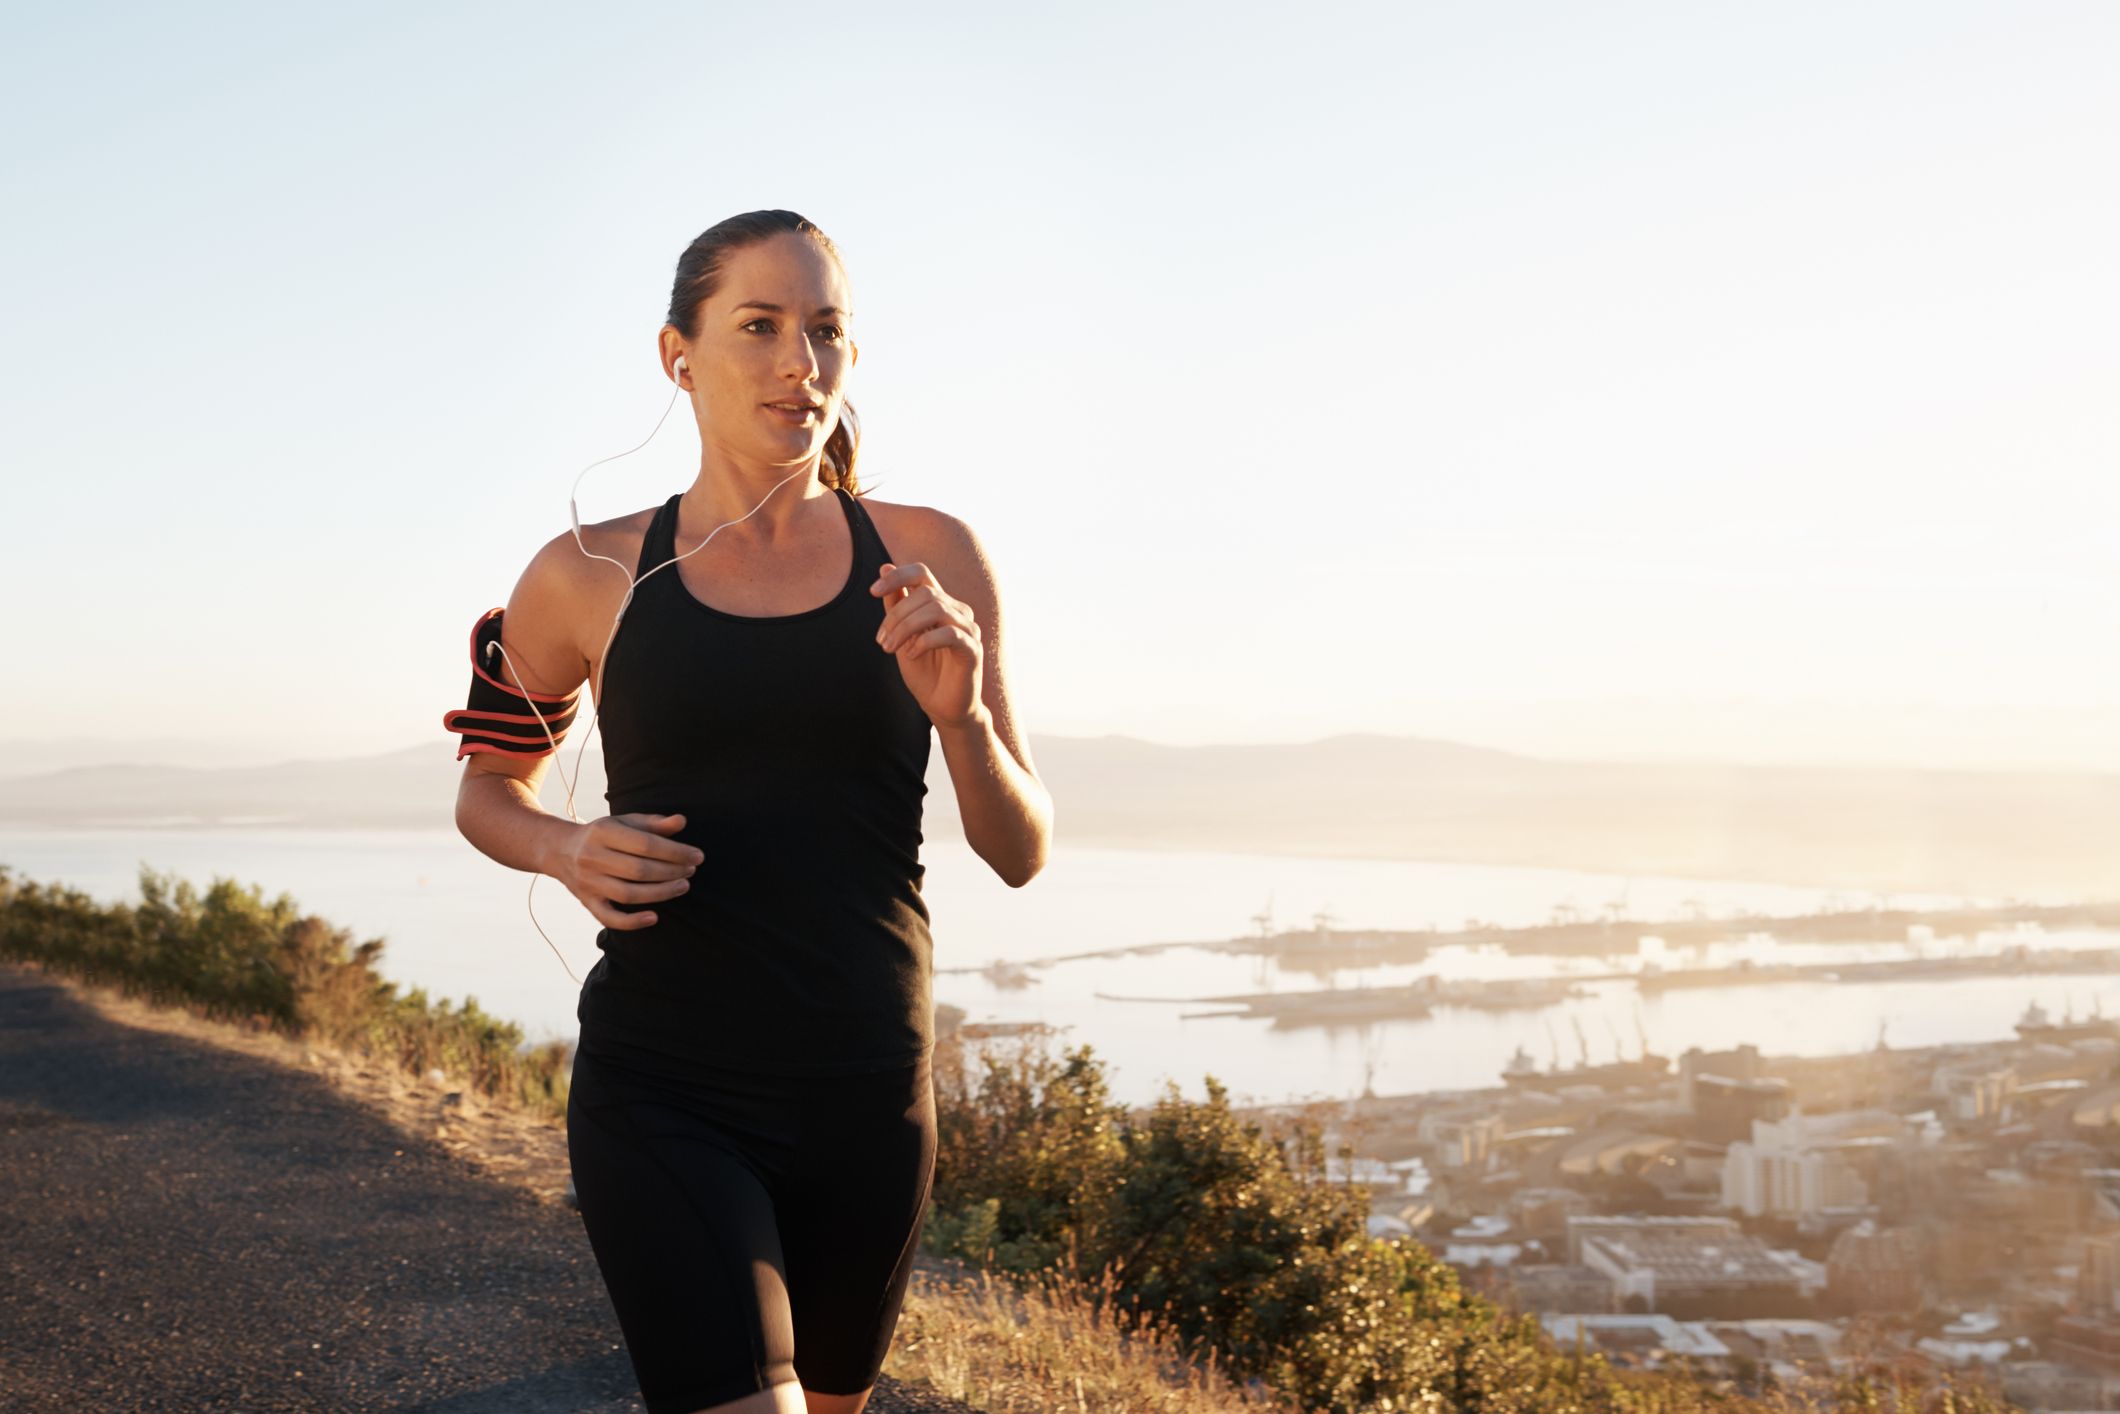 Here Are Eight Tips That Will Help You Run Faster and Enjoy It More!